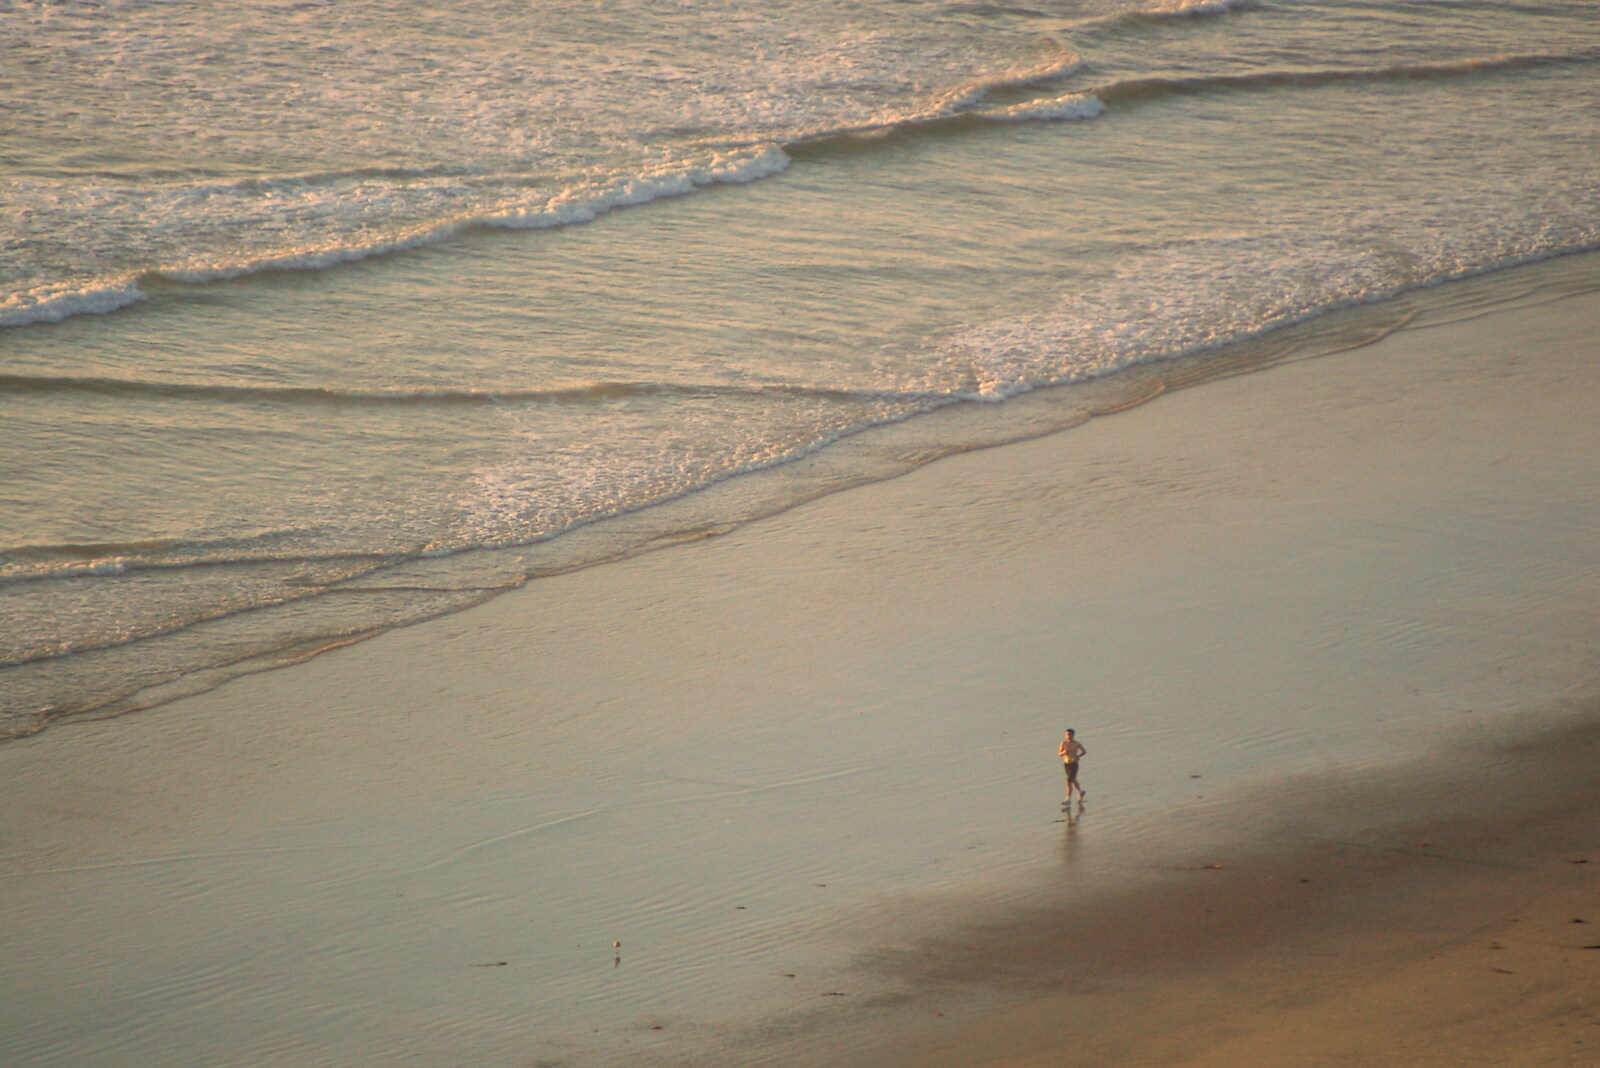 A lone jogger on the beach from San Diego Four, California, US - 22nd September 2005